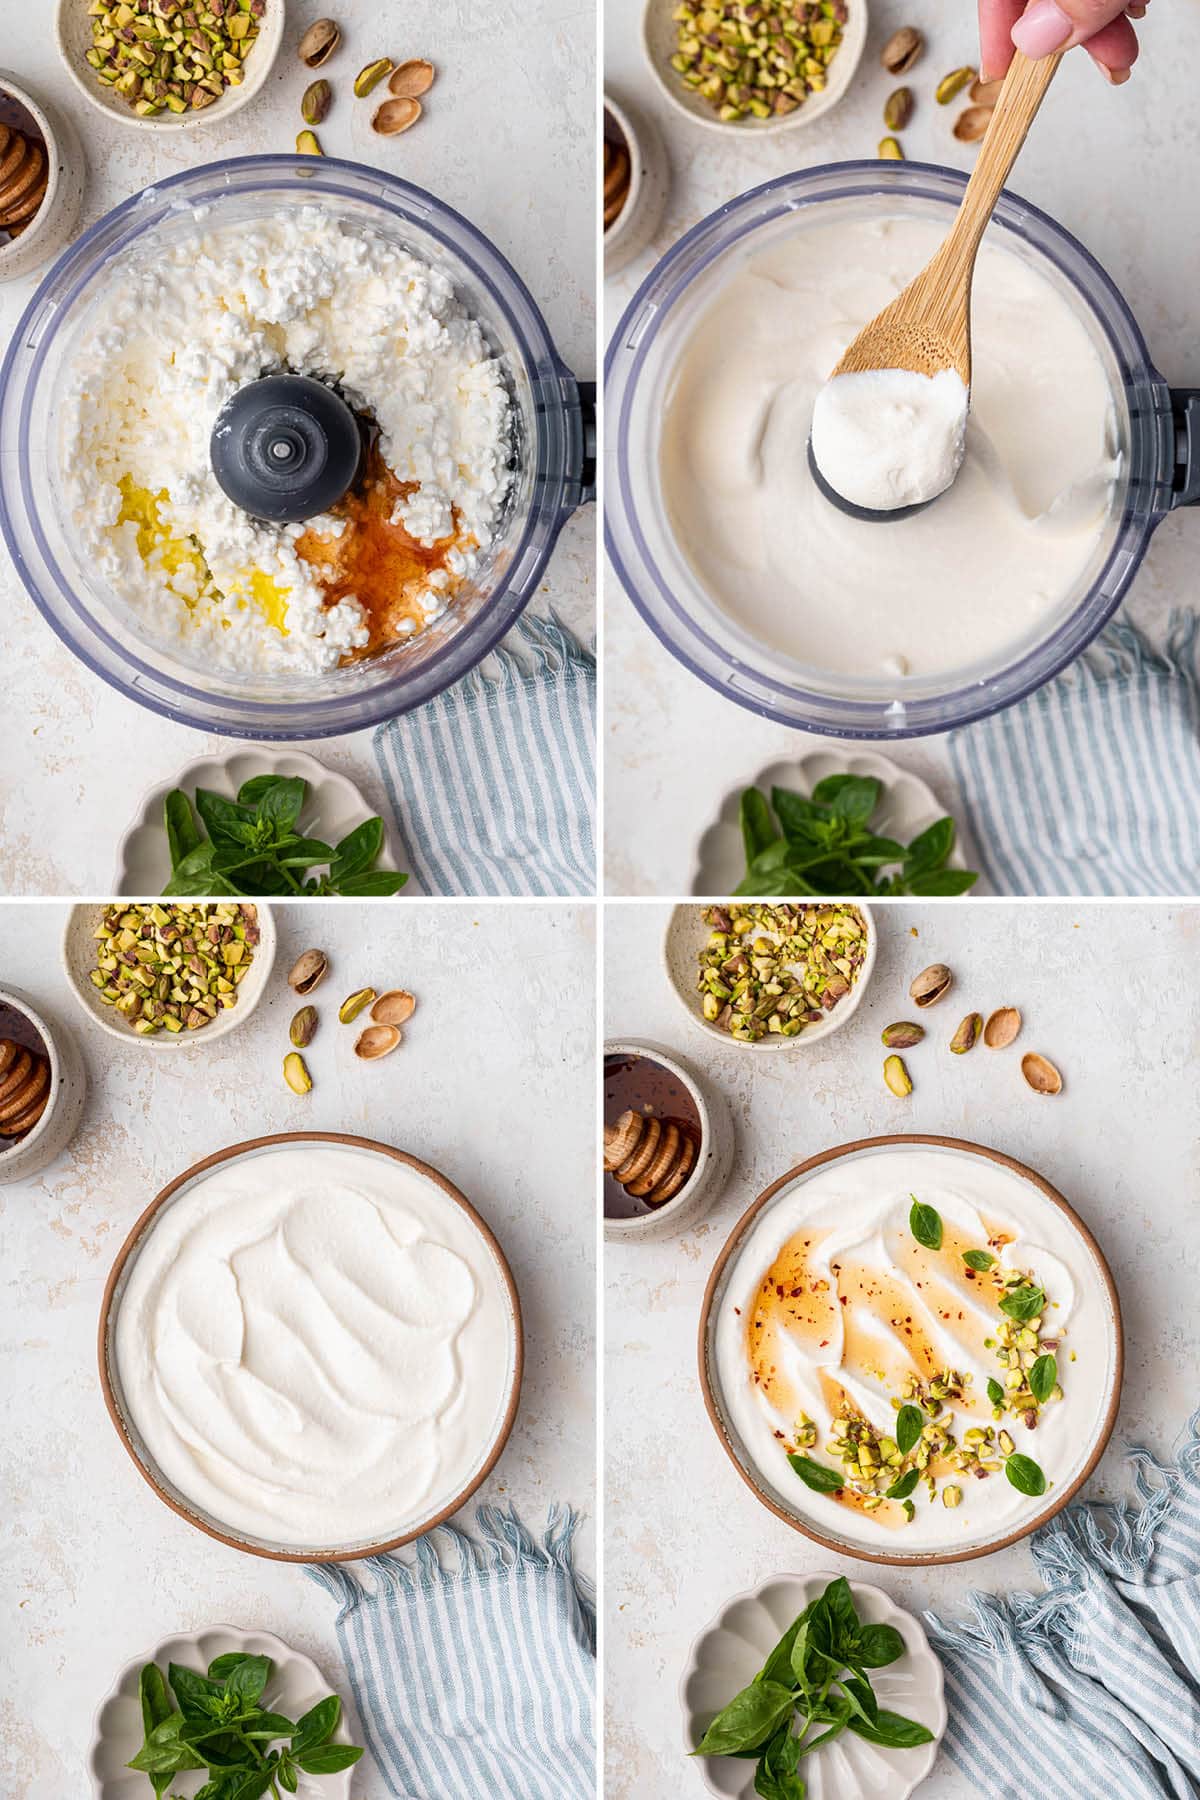 Collage of four photos showing the steps to make and serve Hot Honey Whipped Cottage Cheese: whipping the cottage cheese, hot honey and olive oil in a food processor, and adding to a bowl topped with hot honey, basil, pistachios and olive oil.